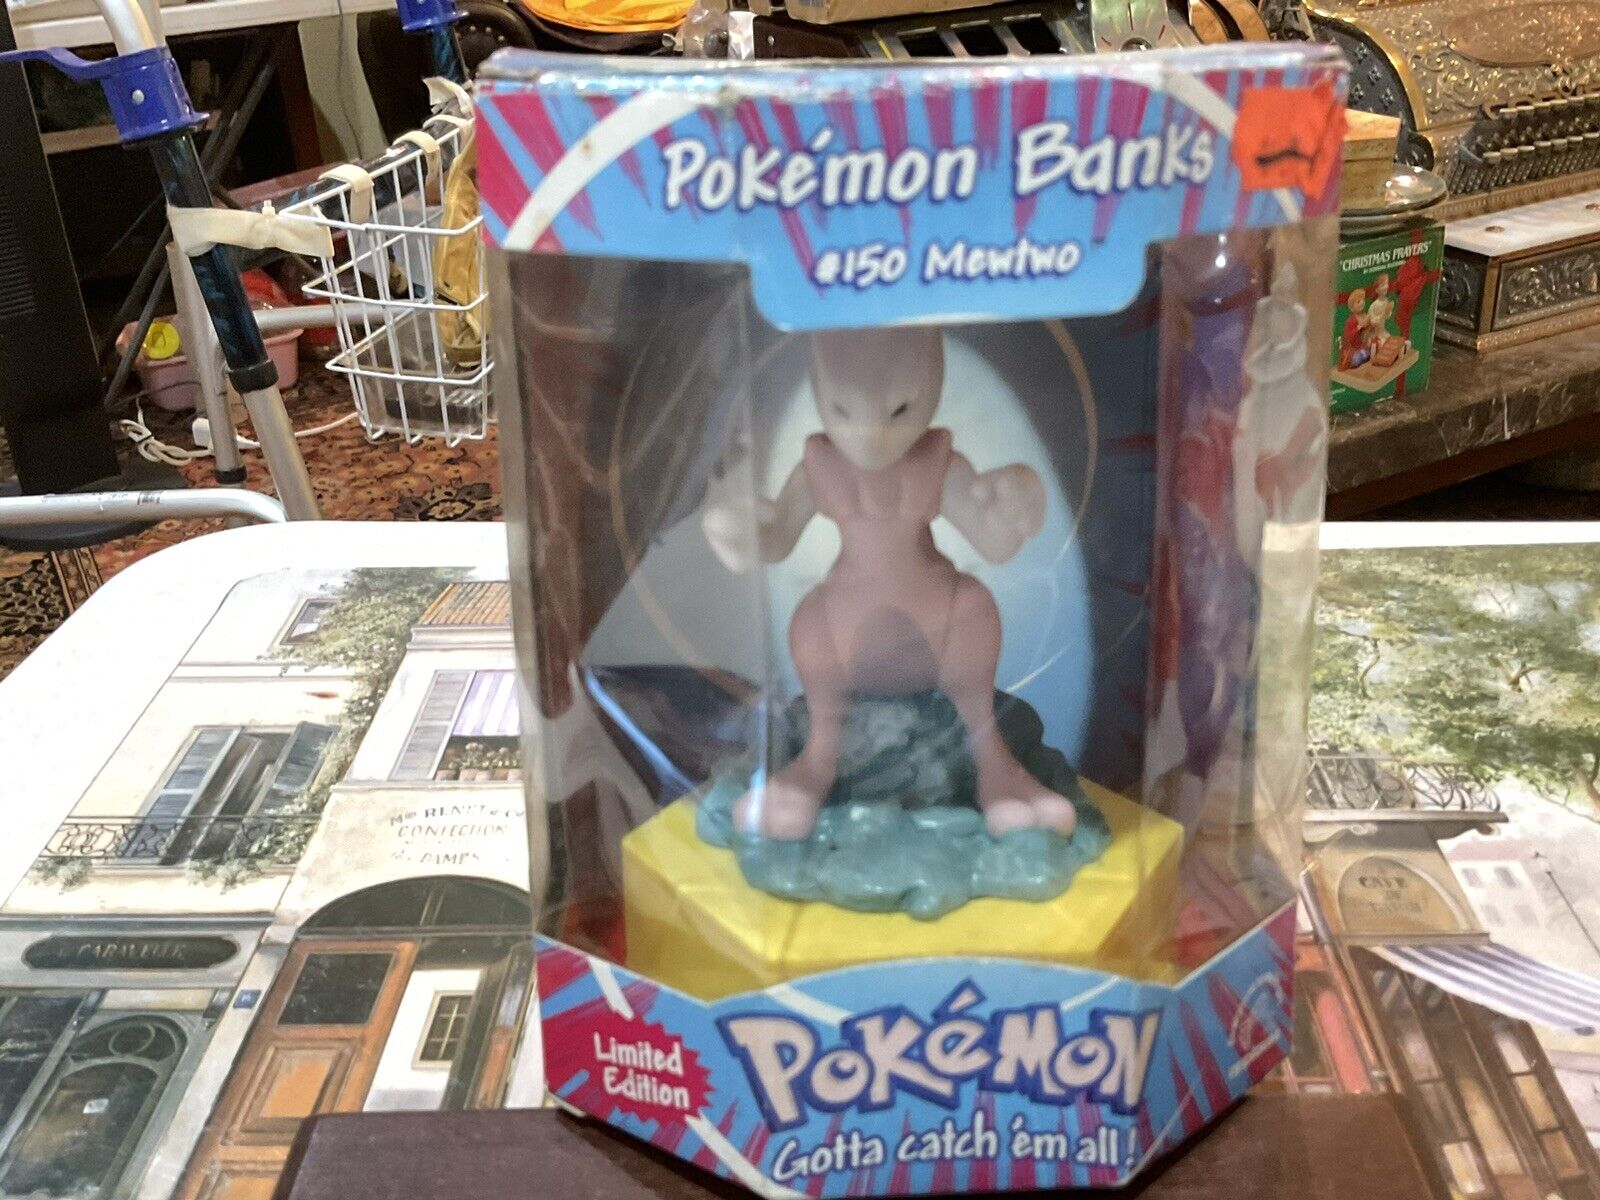 1998 APPLAUSE POKEMON BANKS #150 MEWTWO LIMITED EDITION BANK